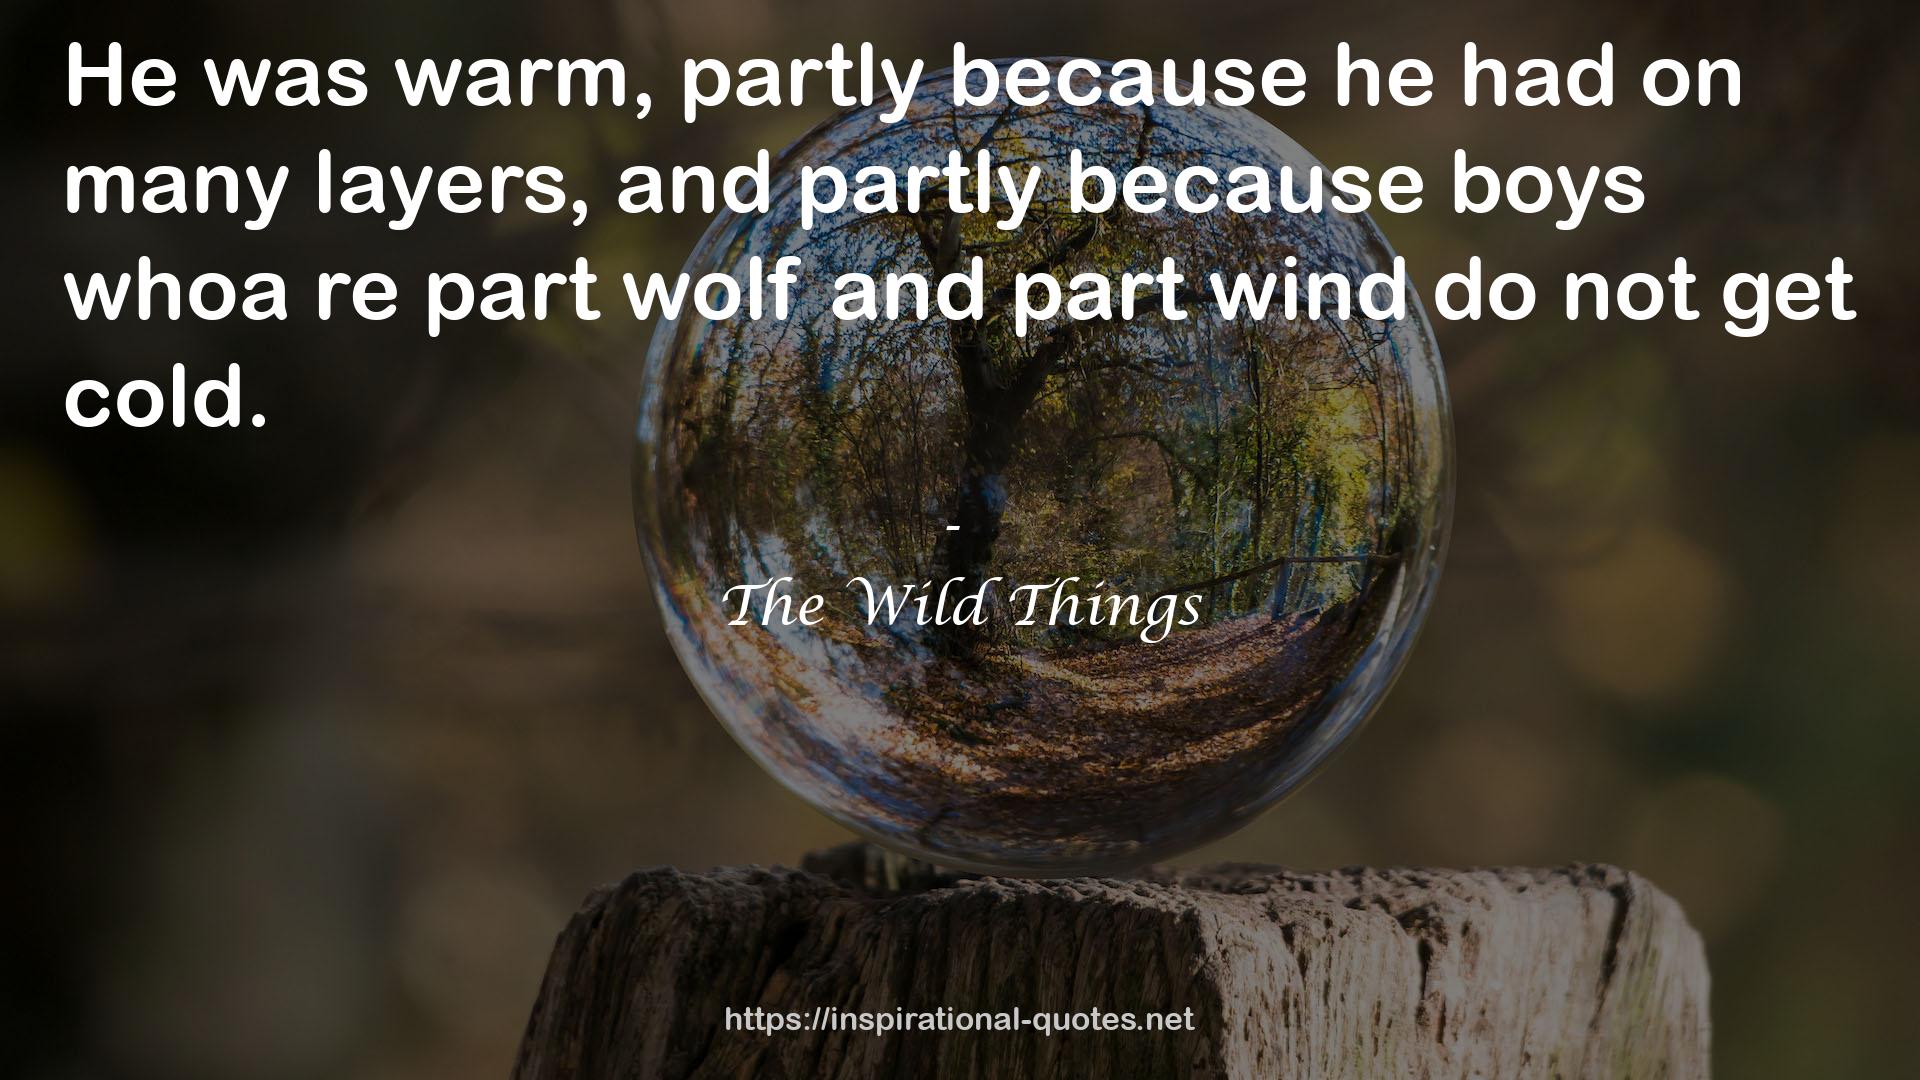 The Wild Things QUOTES